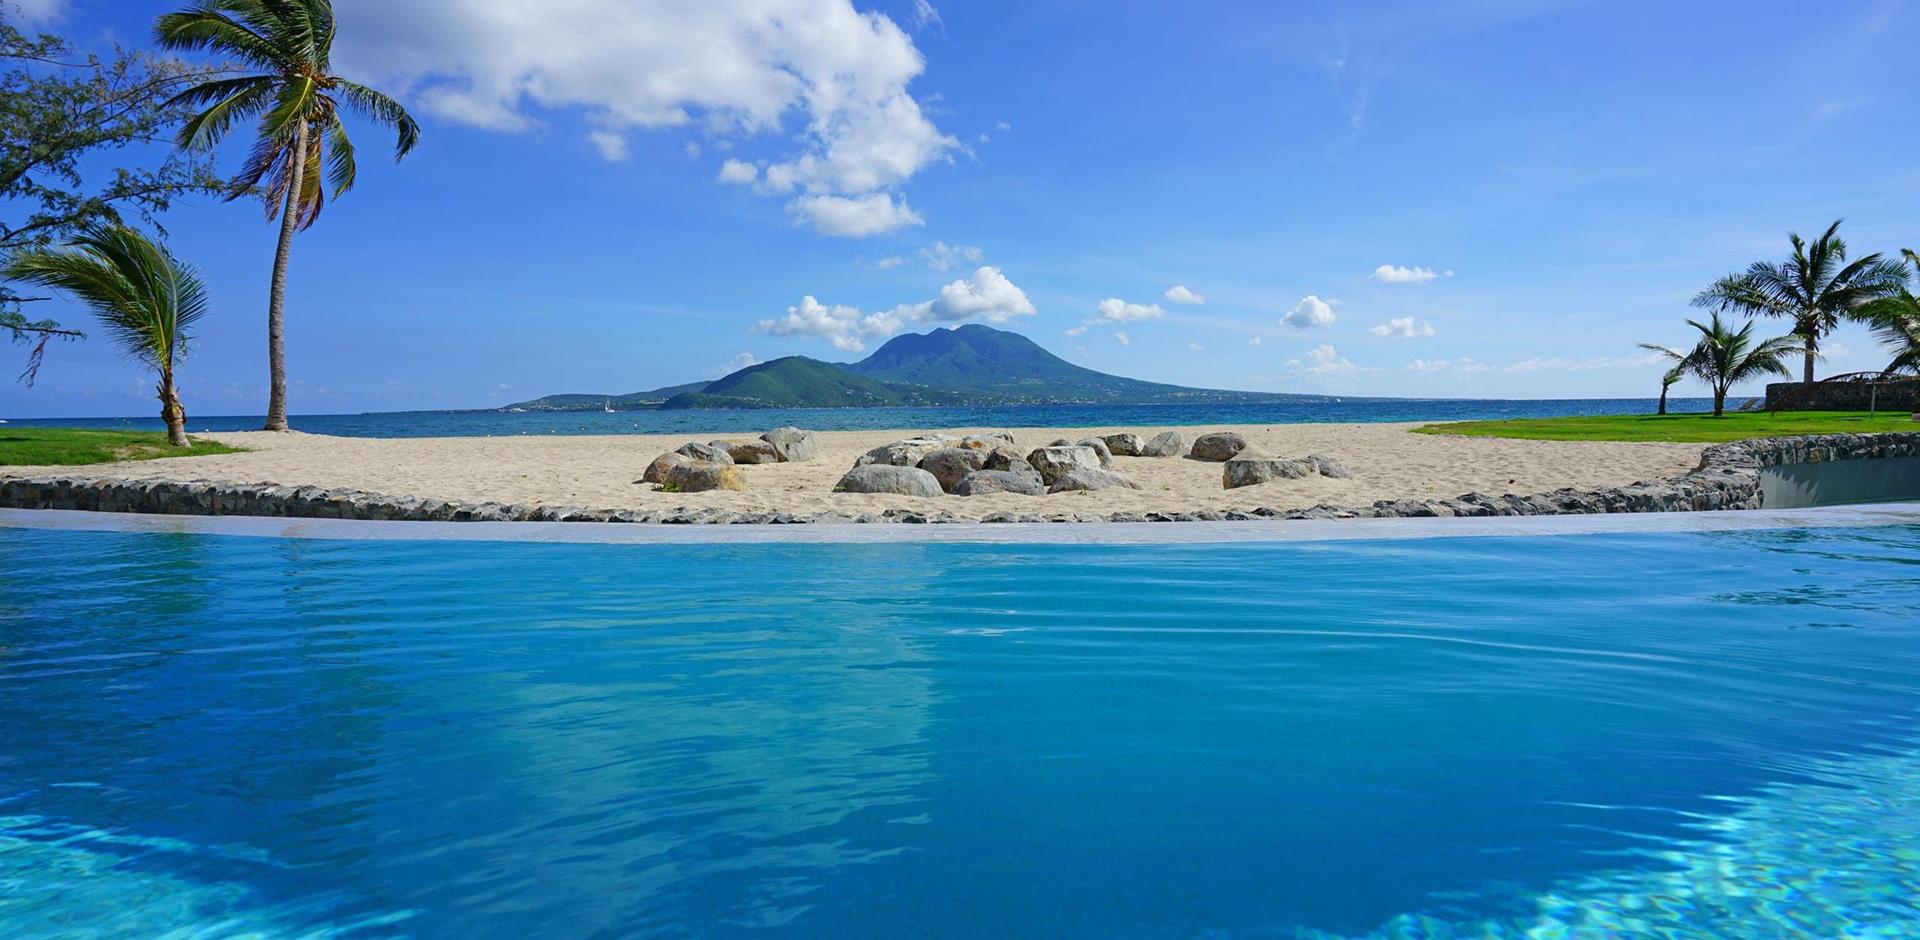 View of the Nevis peak across the water from St Kitts, Caribbean